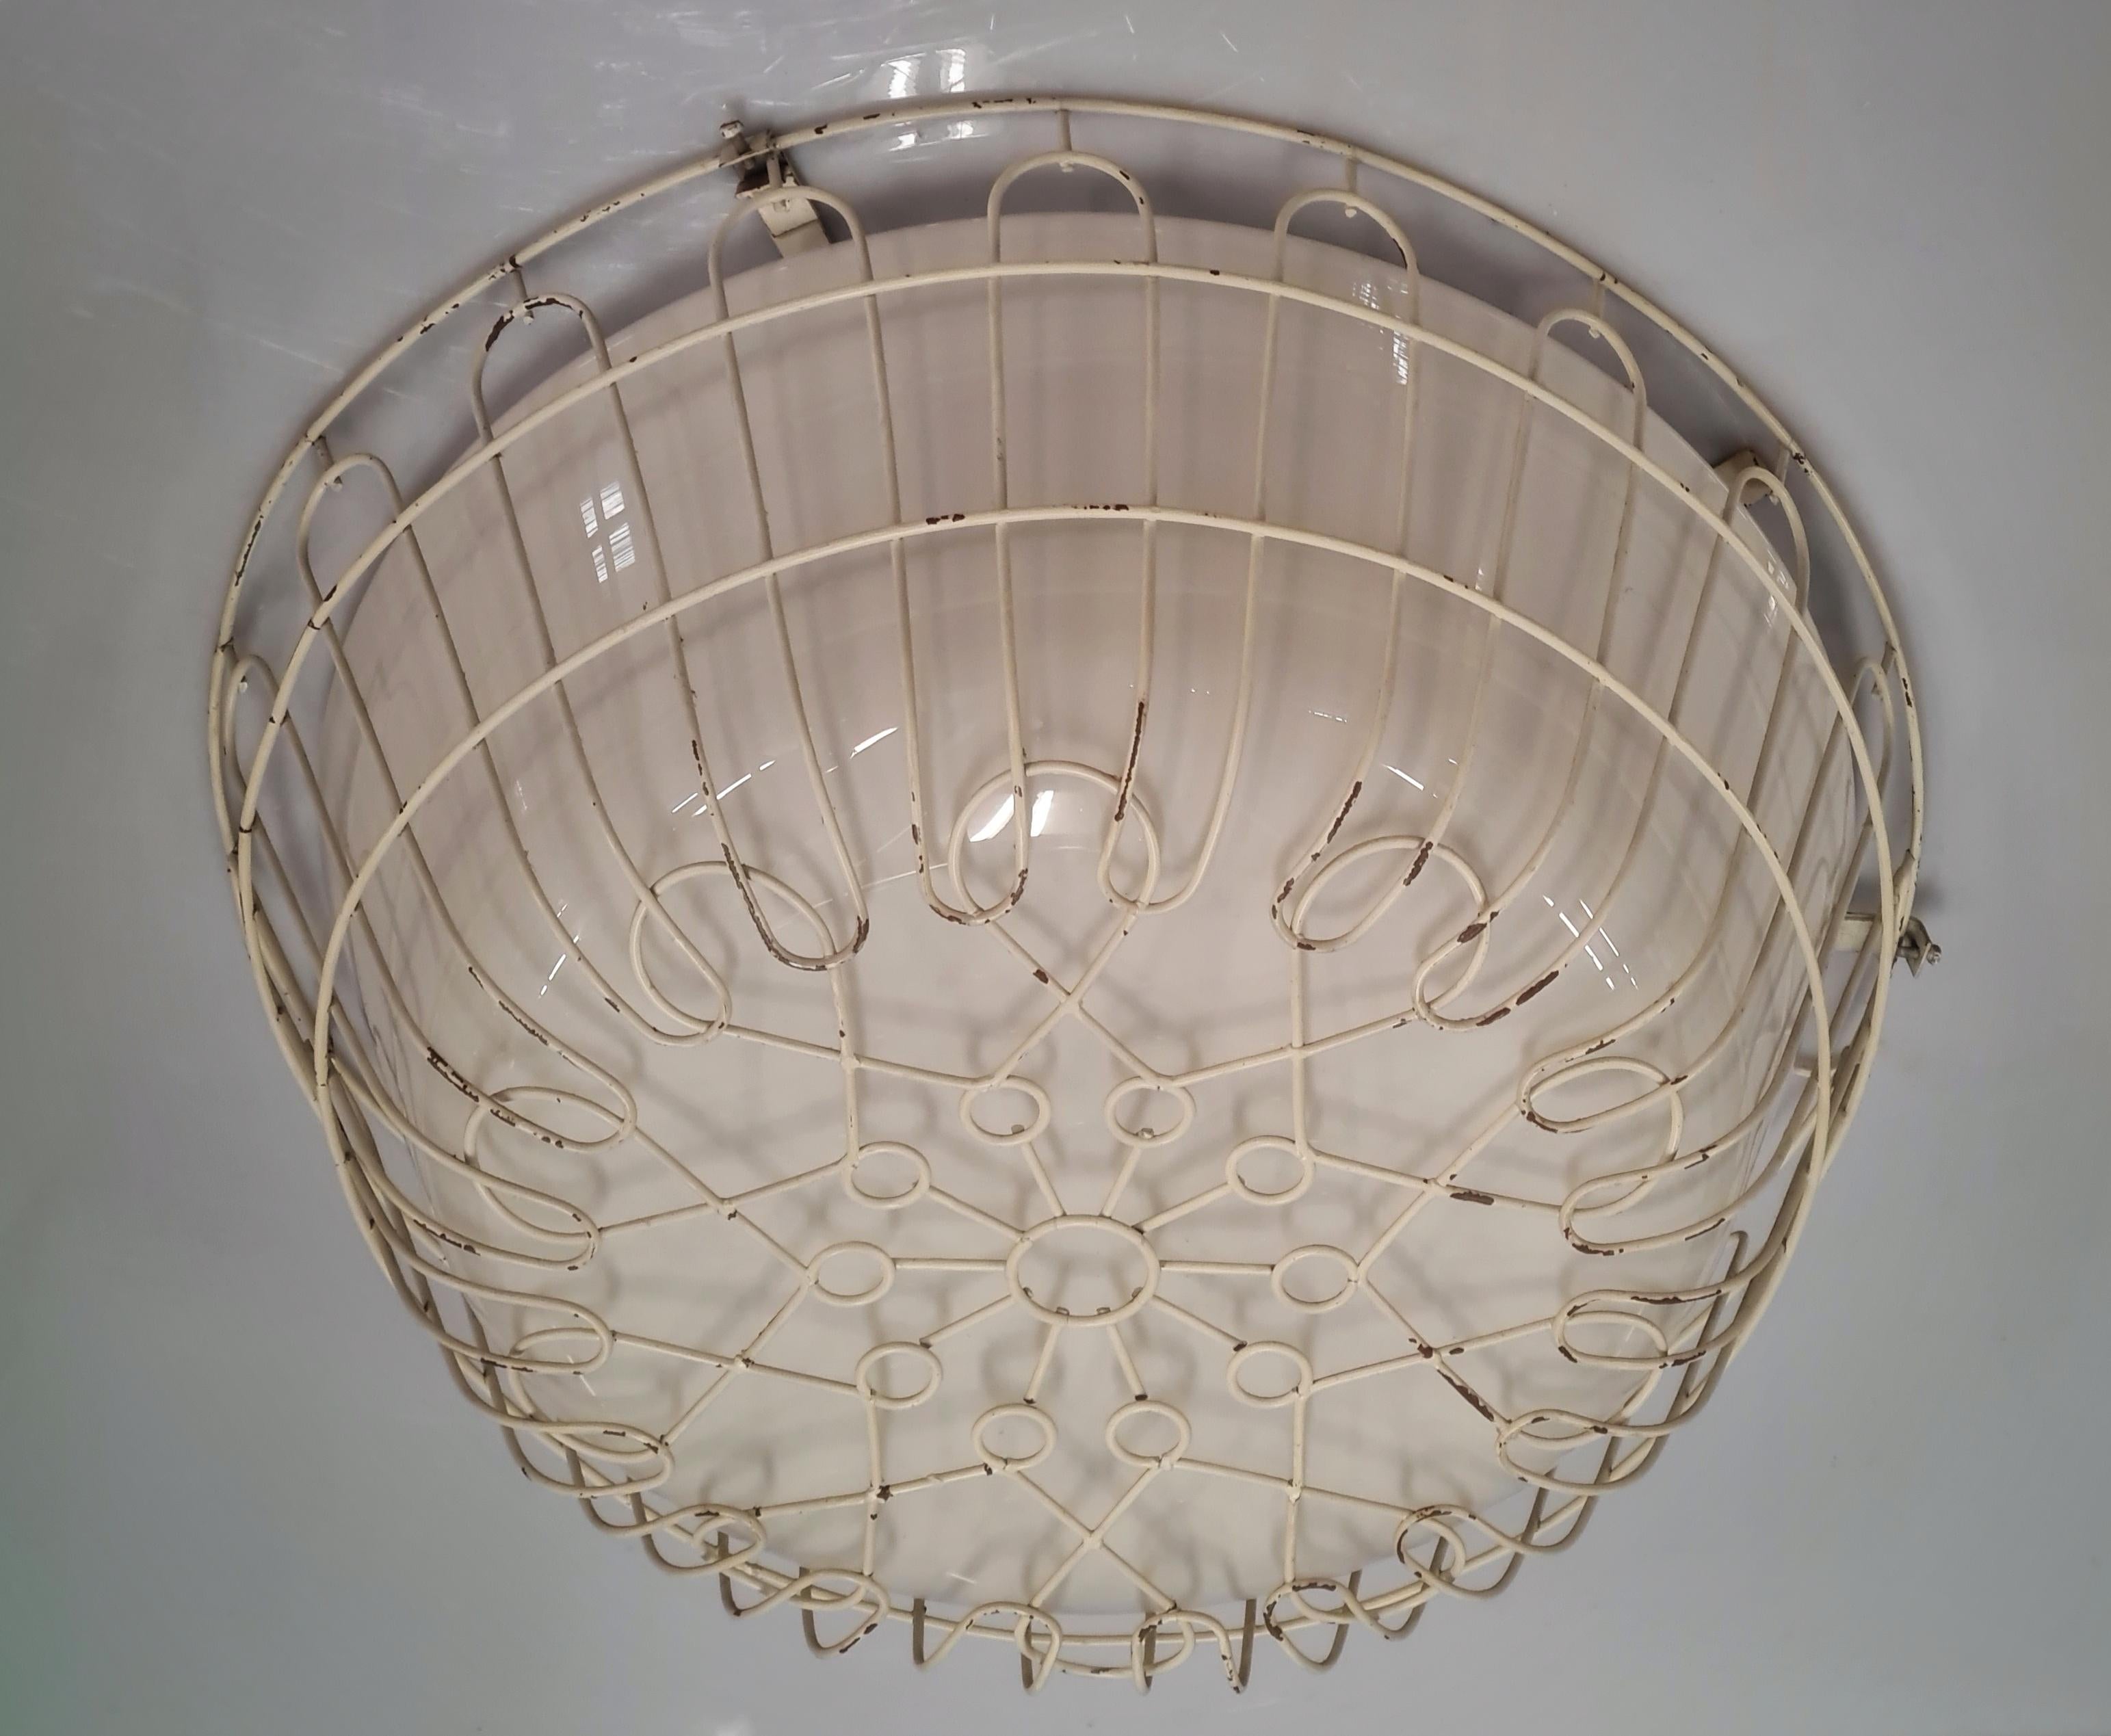 A Beautiful and Lively Lisa Johansson-Papé Ceiling Lamp Model 71-115, Orno 1950s For Sale 4